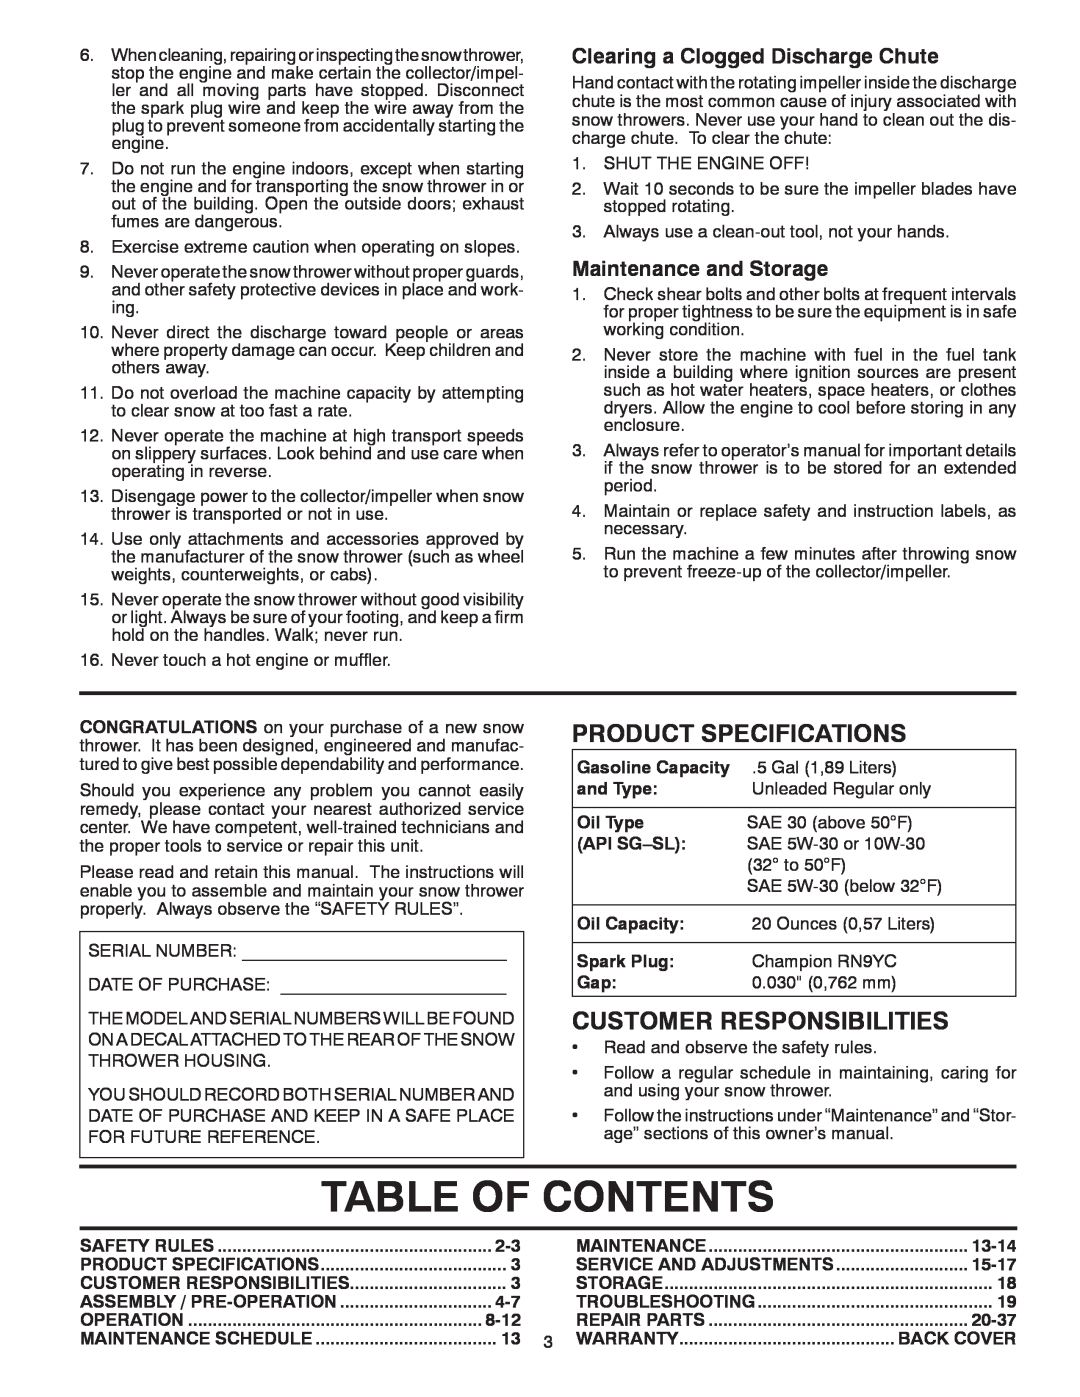 Poulan 96192003700 Table Of Contents, Clearing a Clogged Discharge Chute, Maintenance and Storage, Product Specifications 